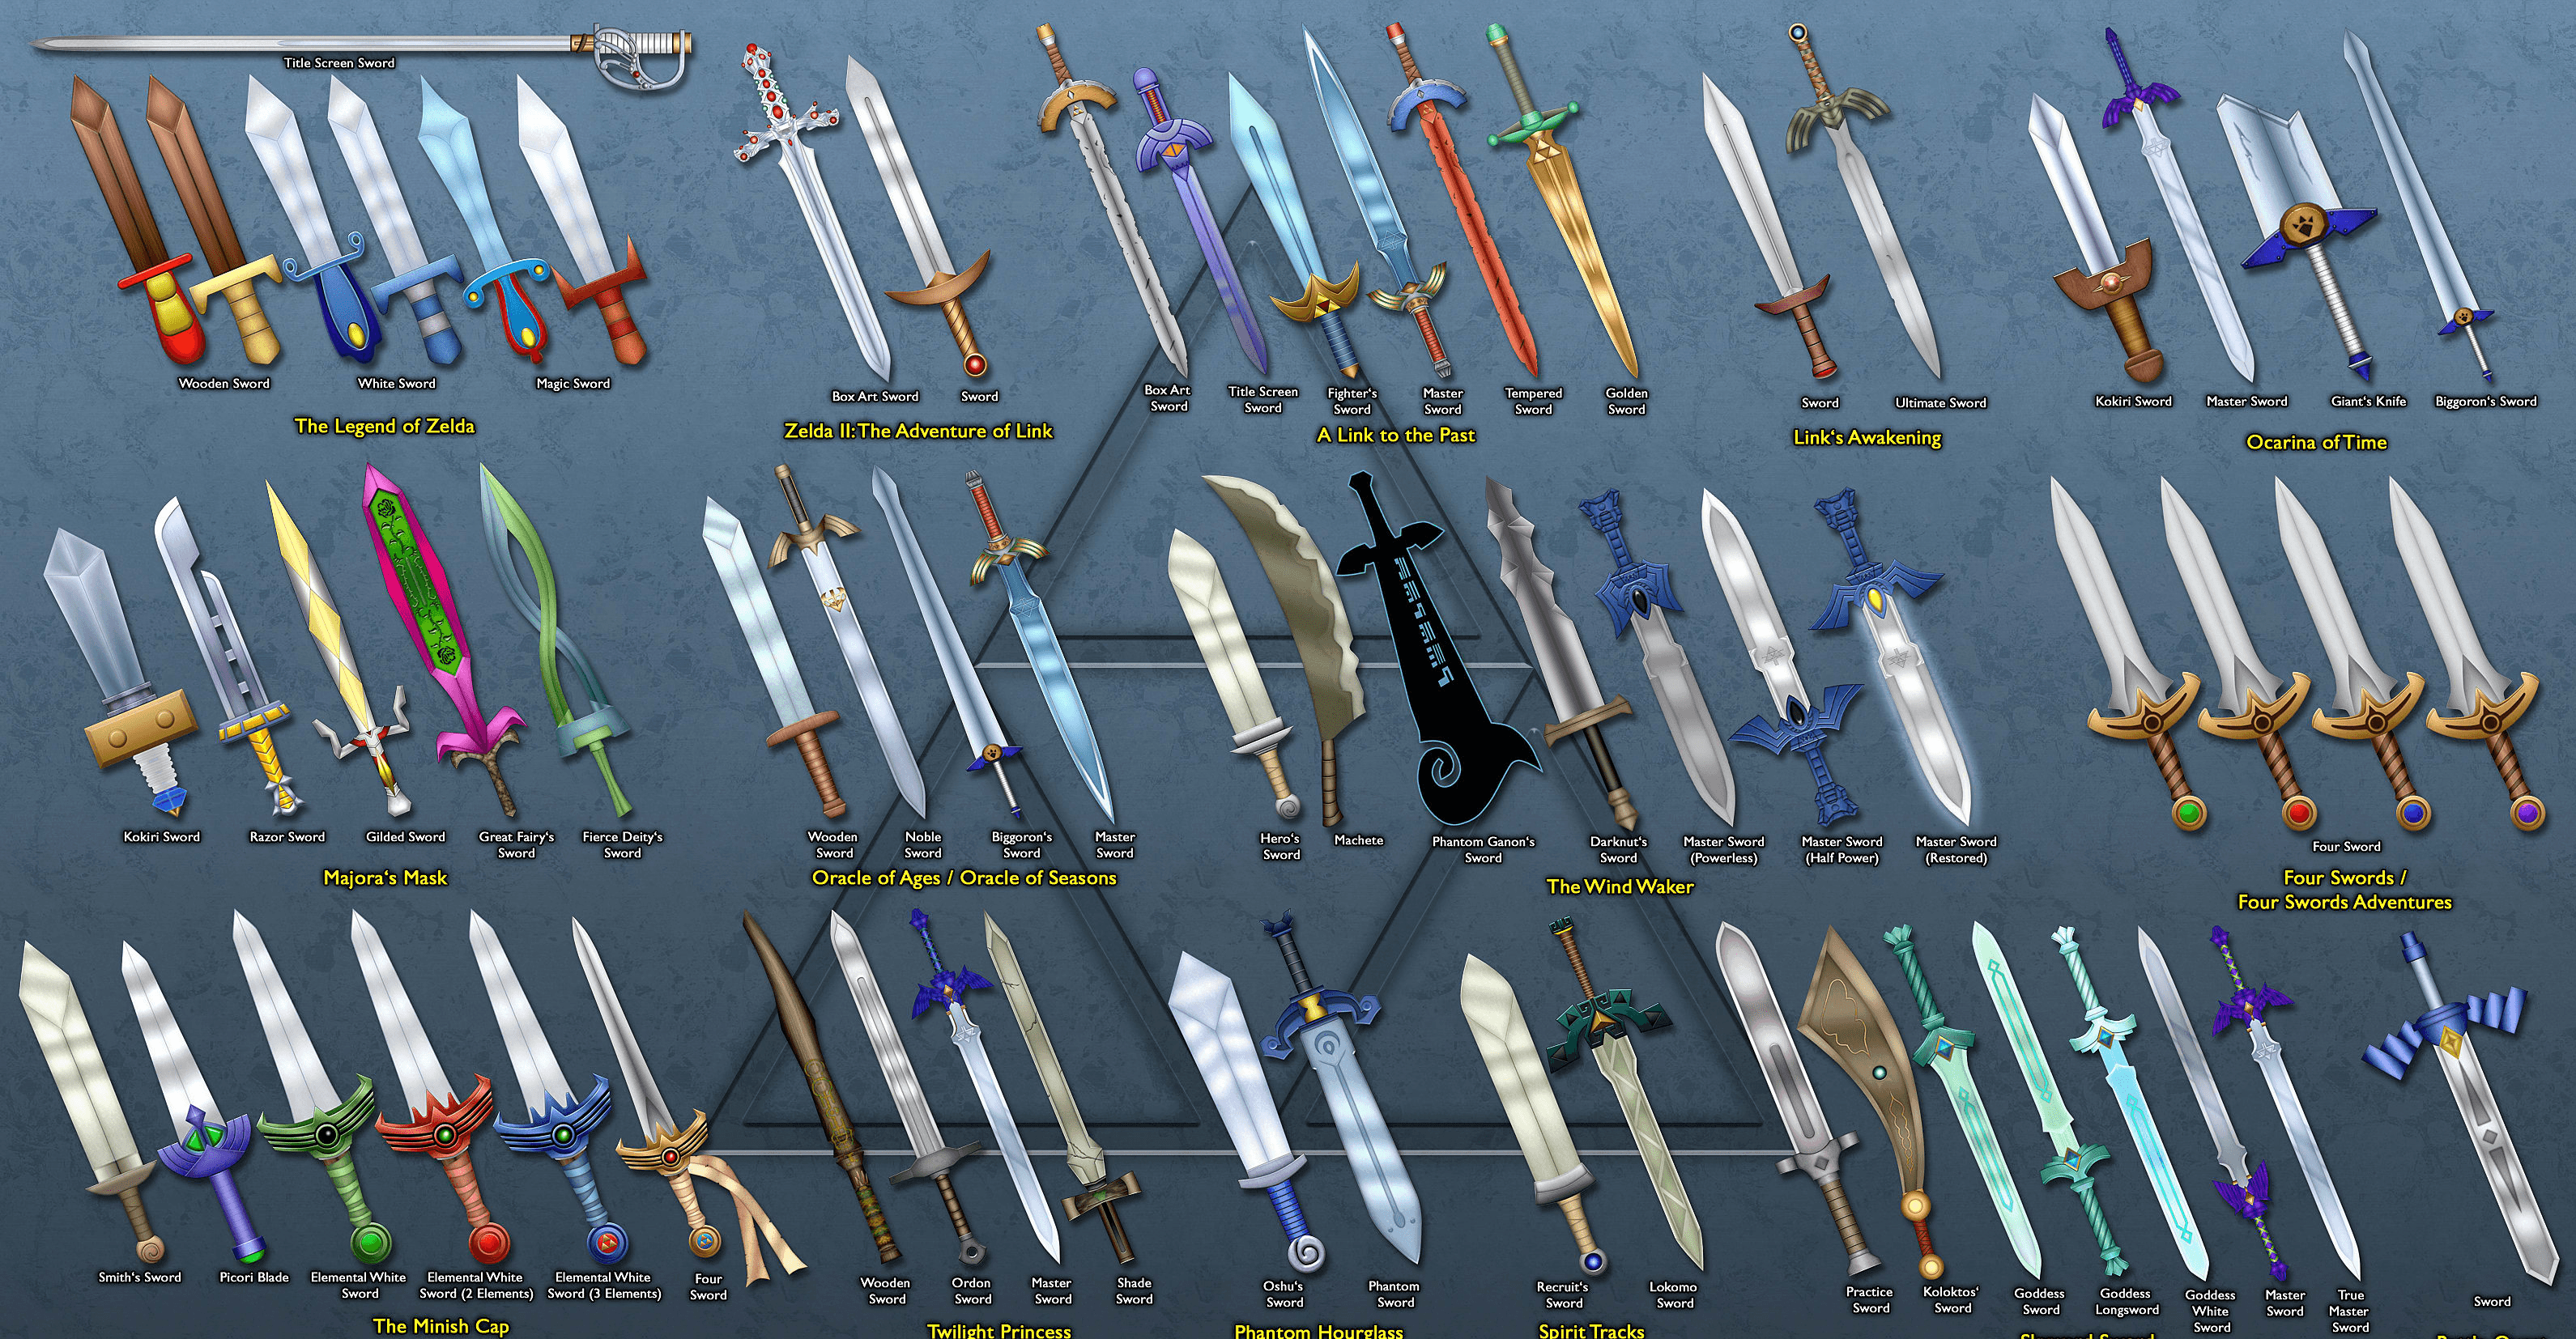 All The Swords